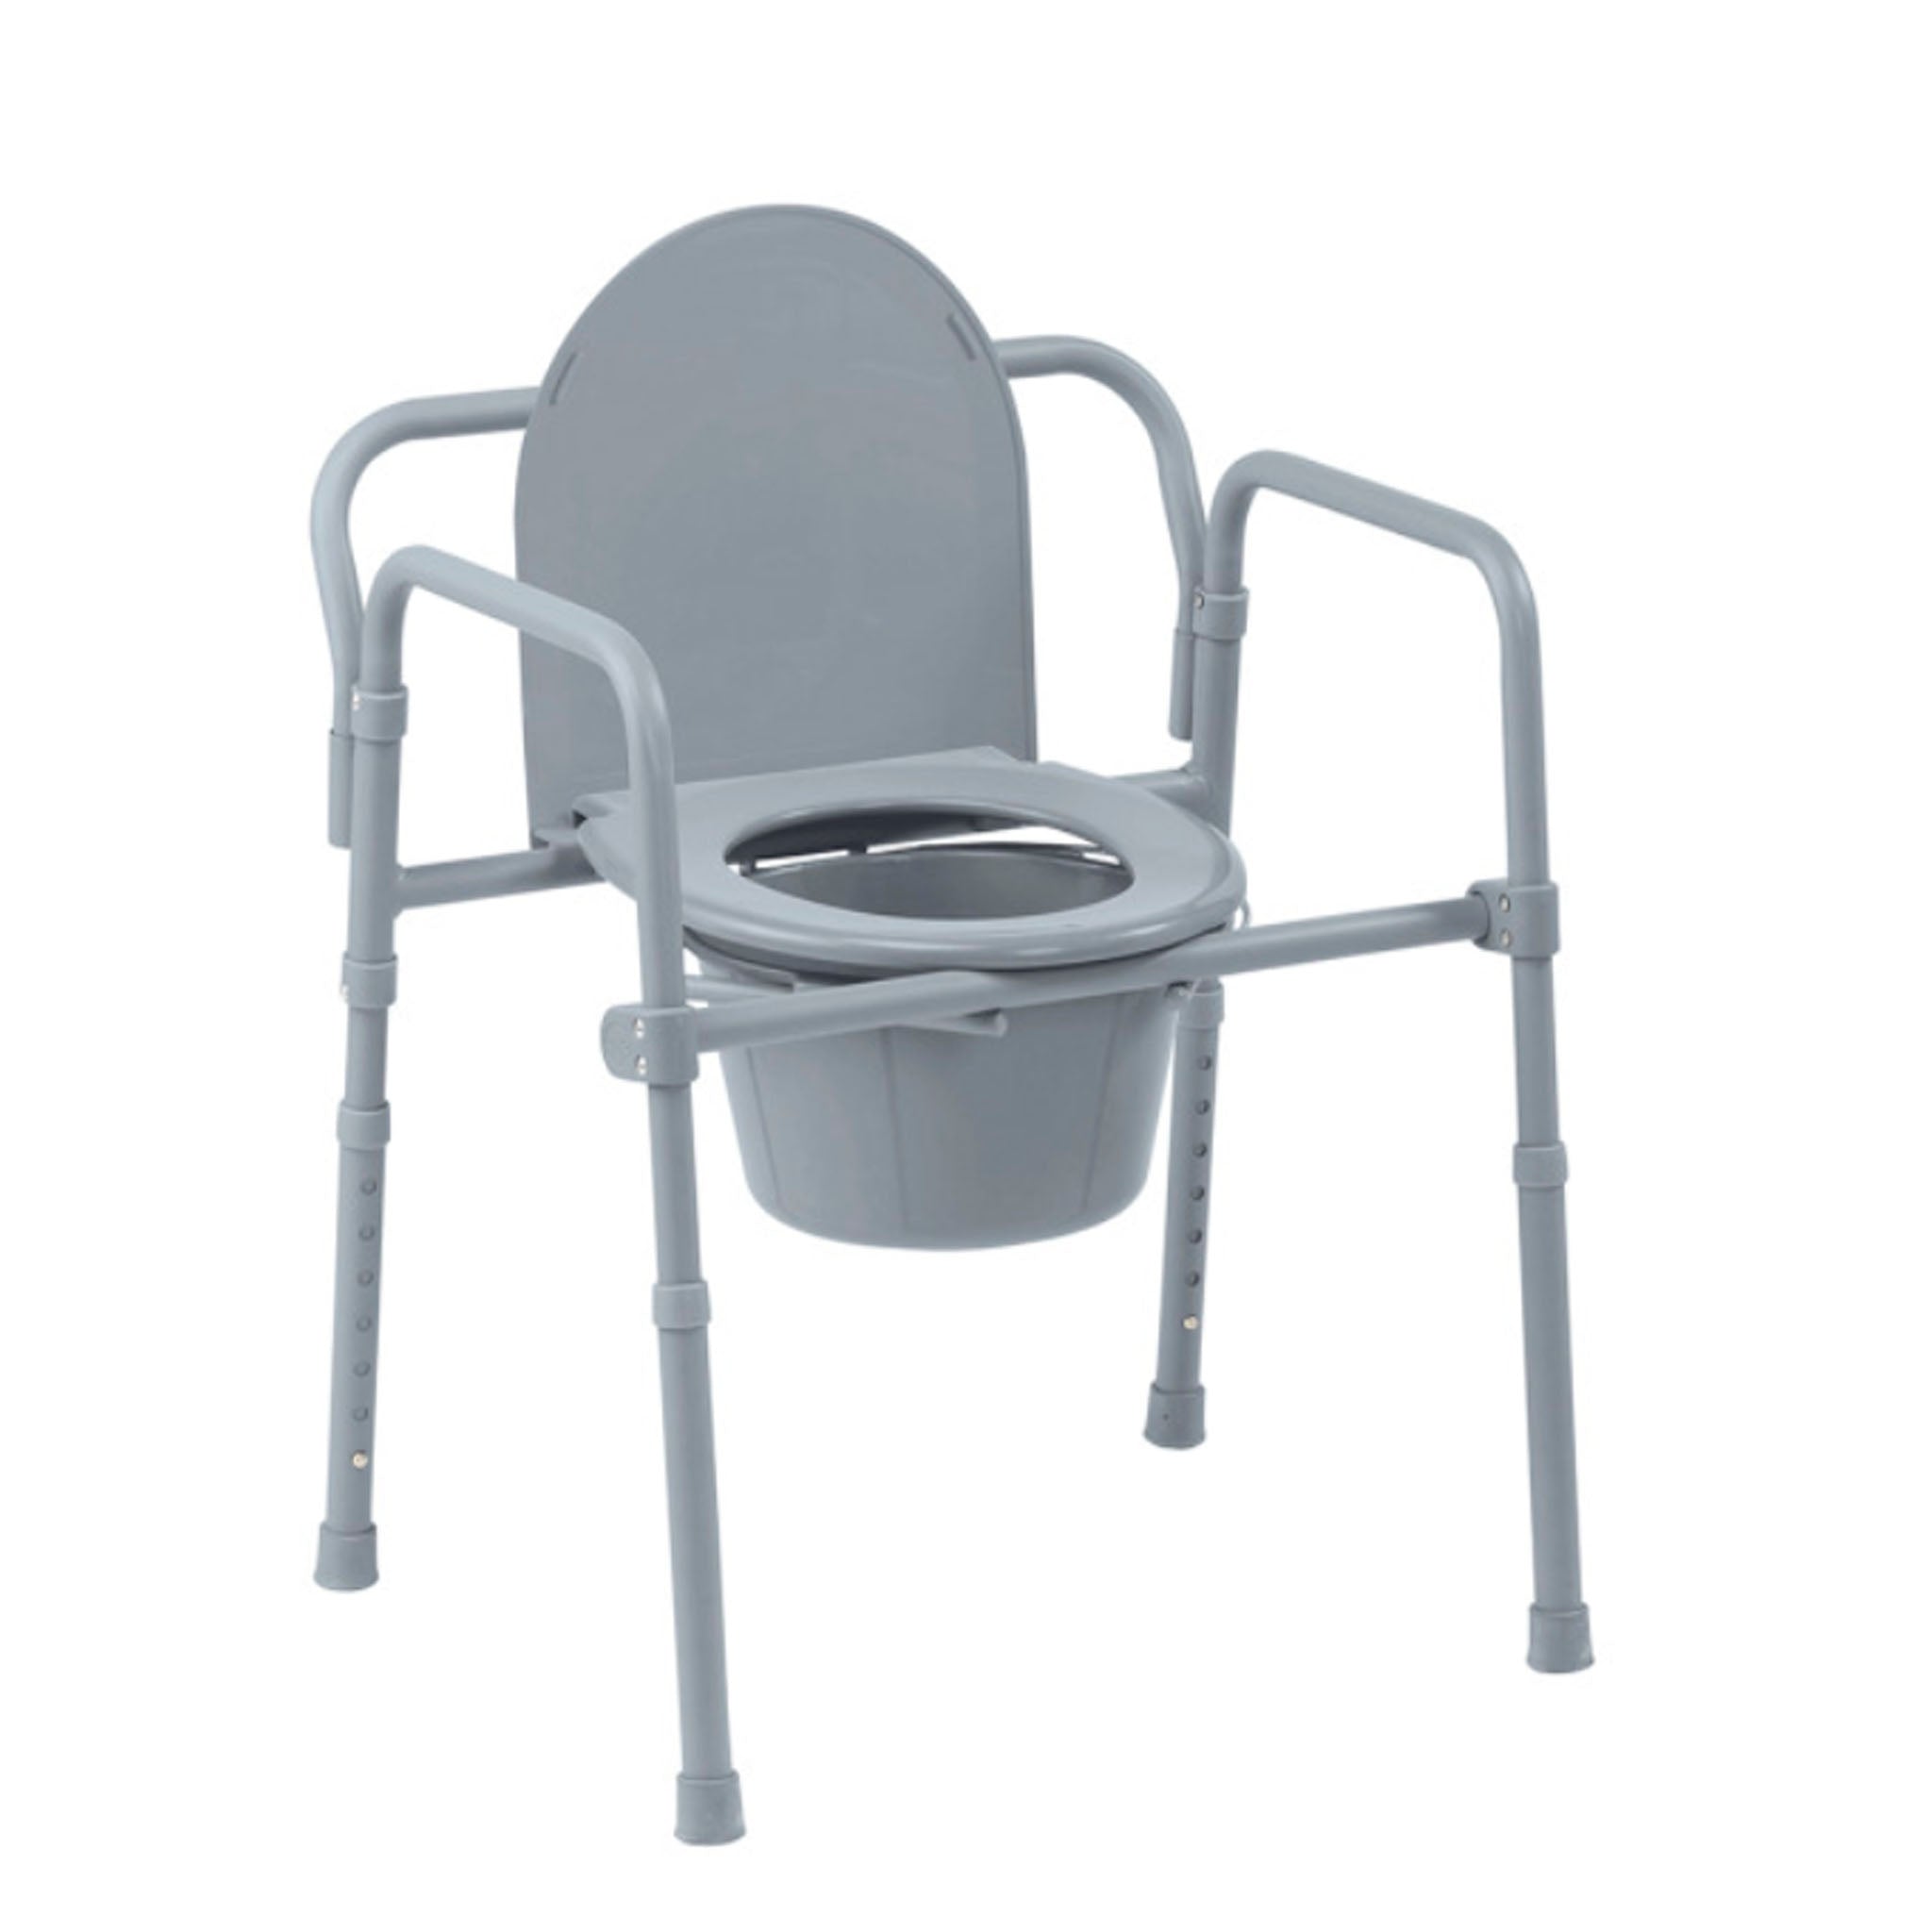 Competitive Edge Line 3-in-1 Folding Commode by Drive